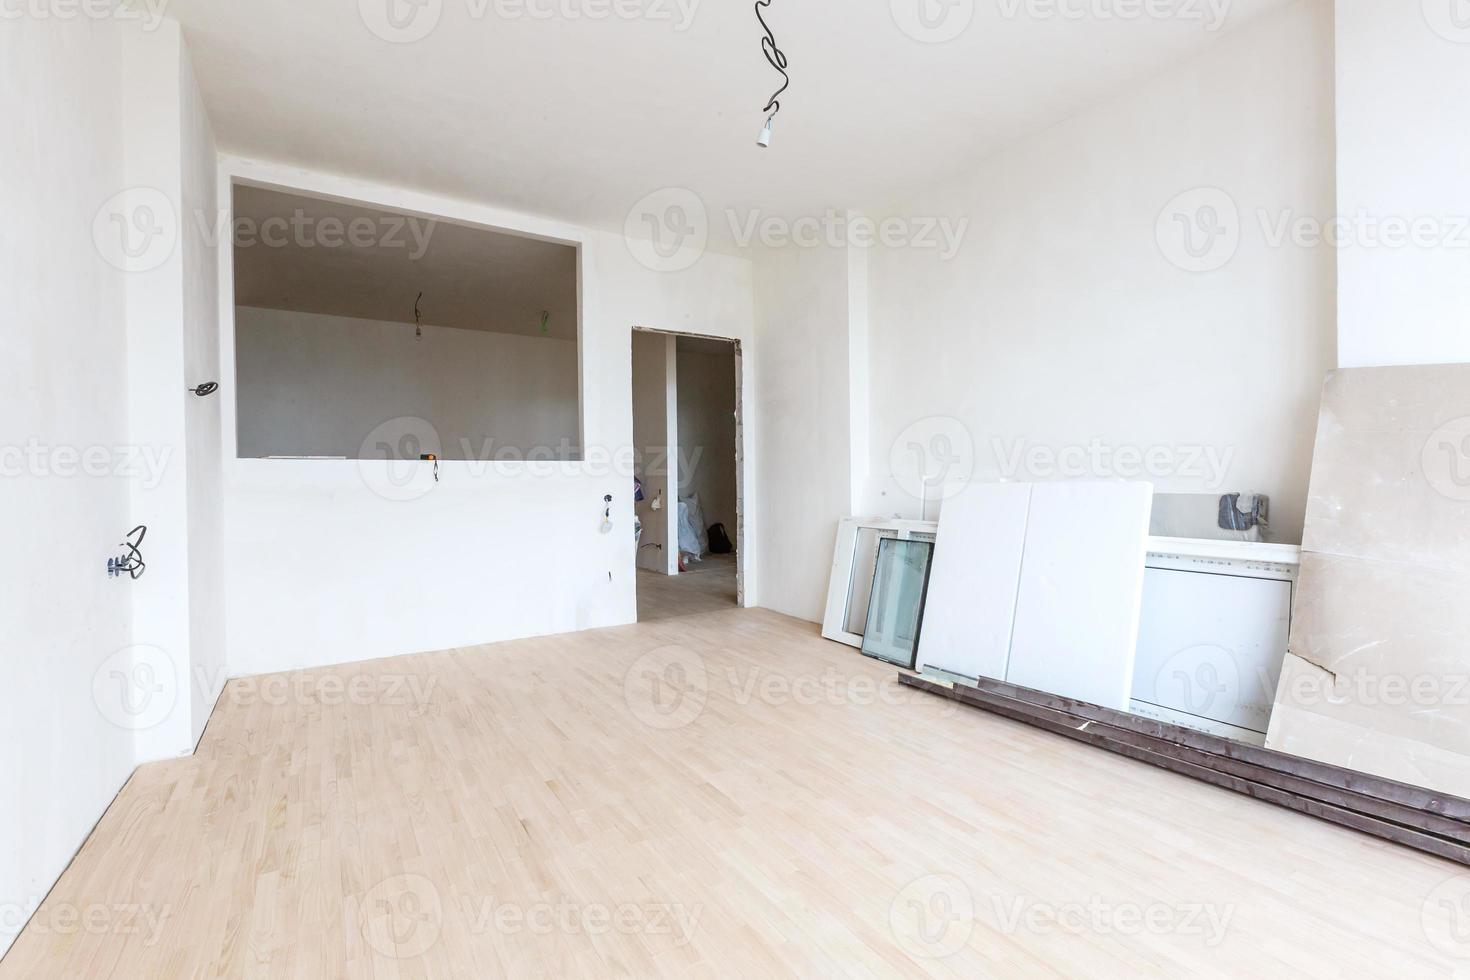 Interior of apartment during on the renovation and construction photo